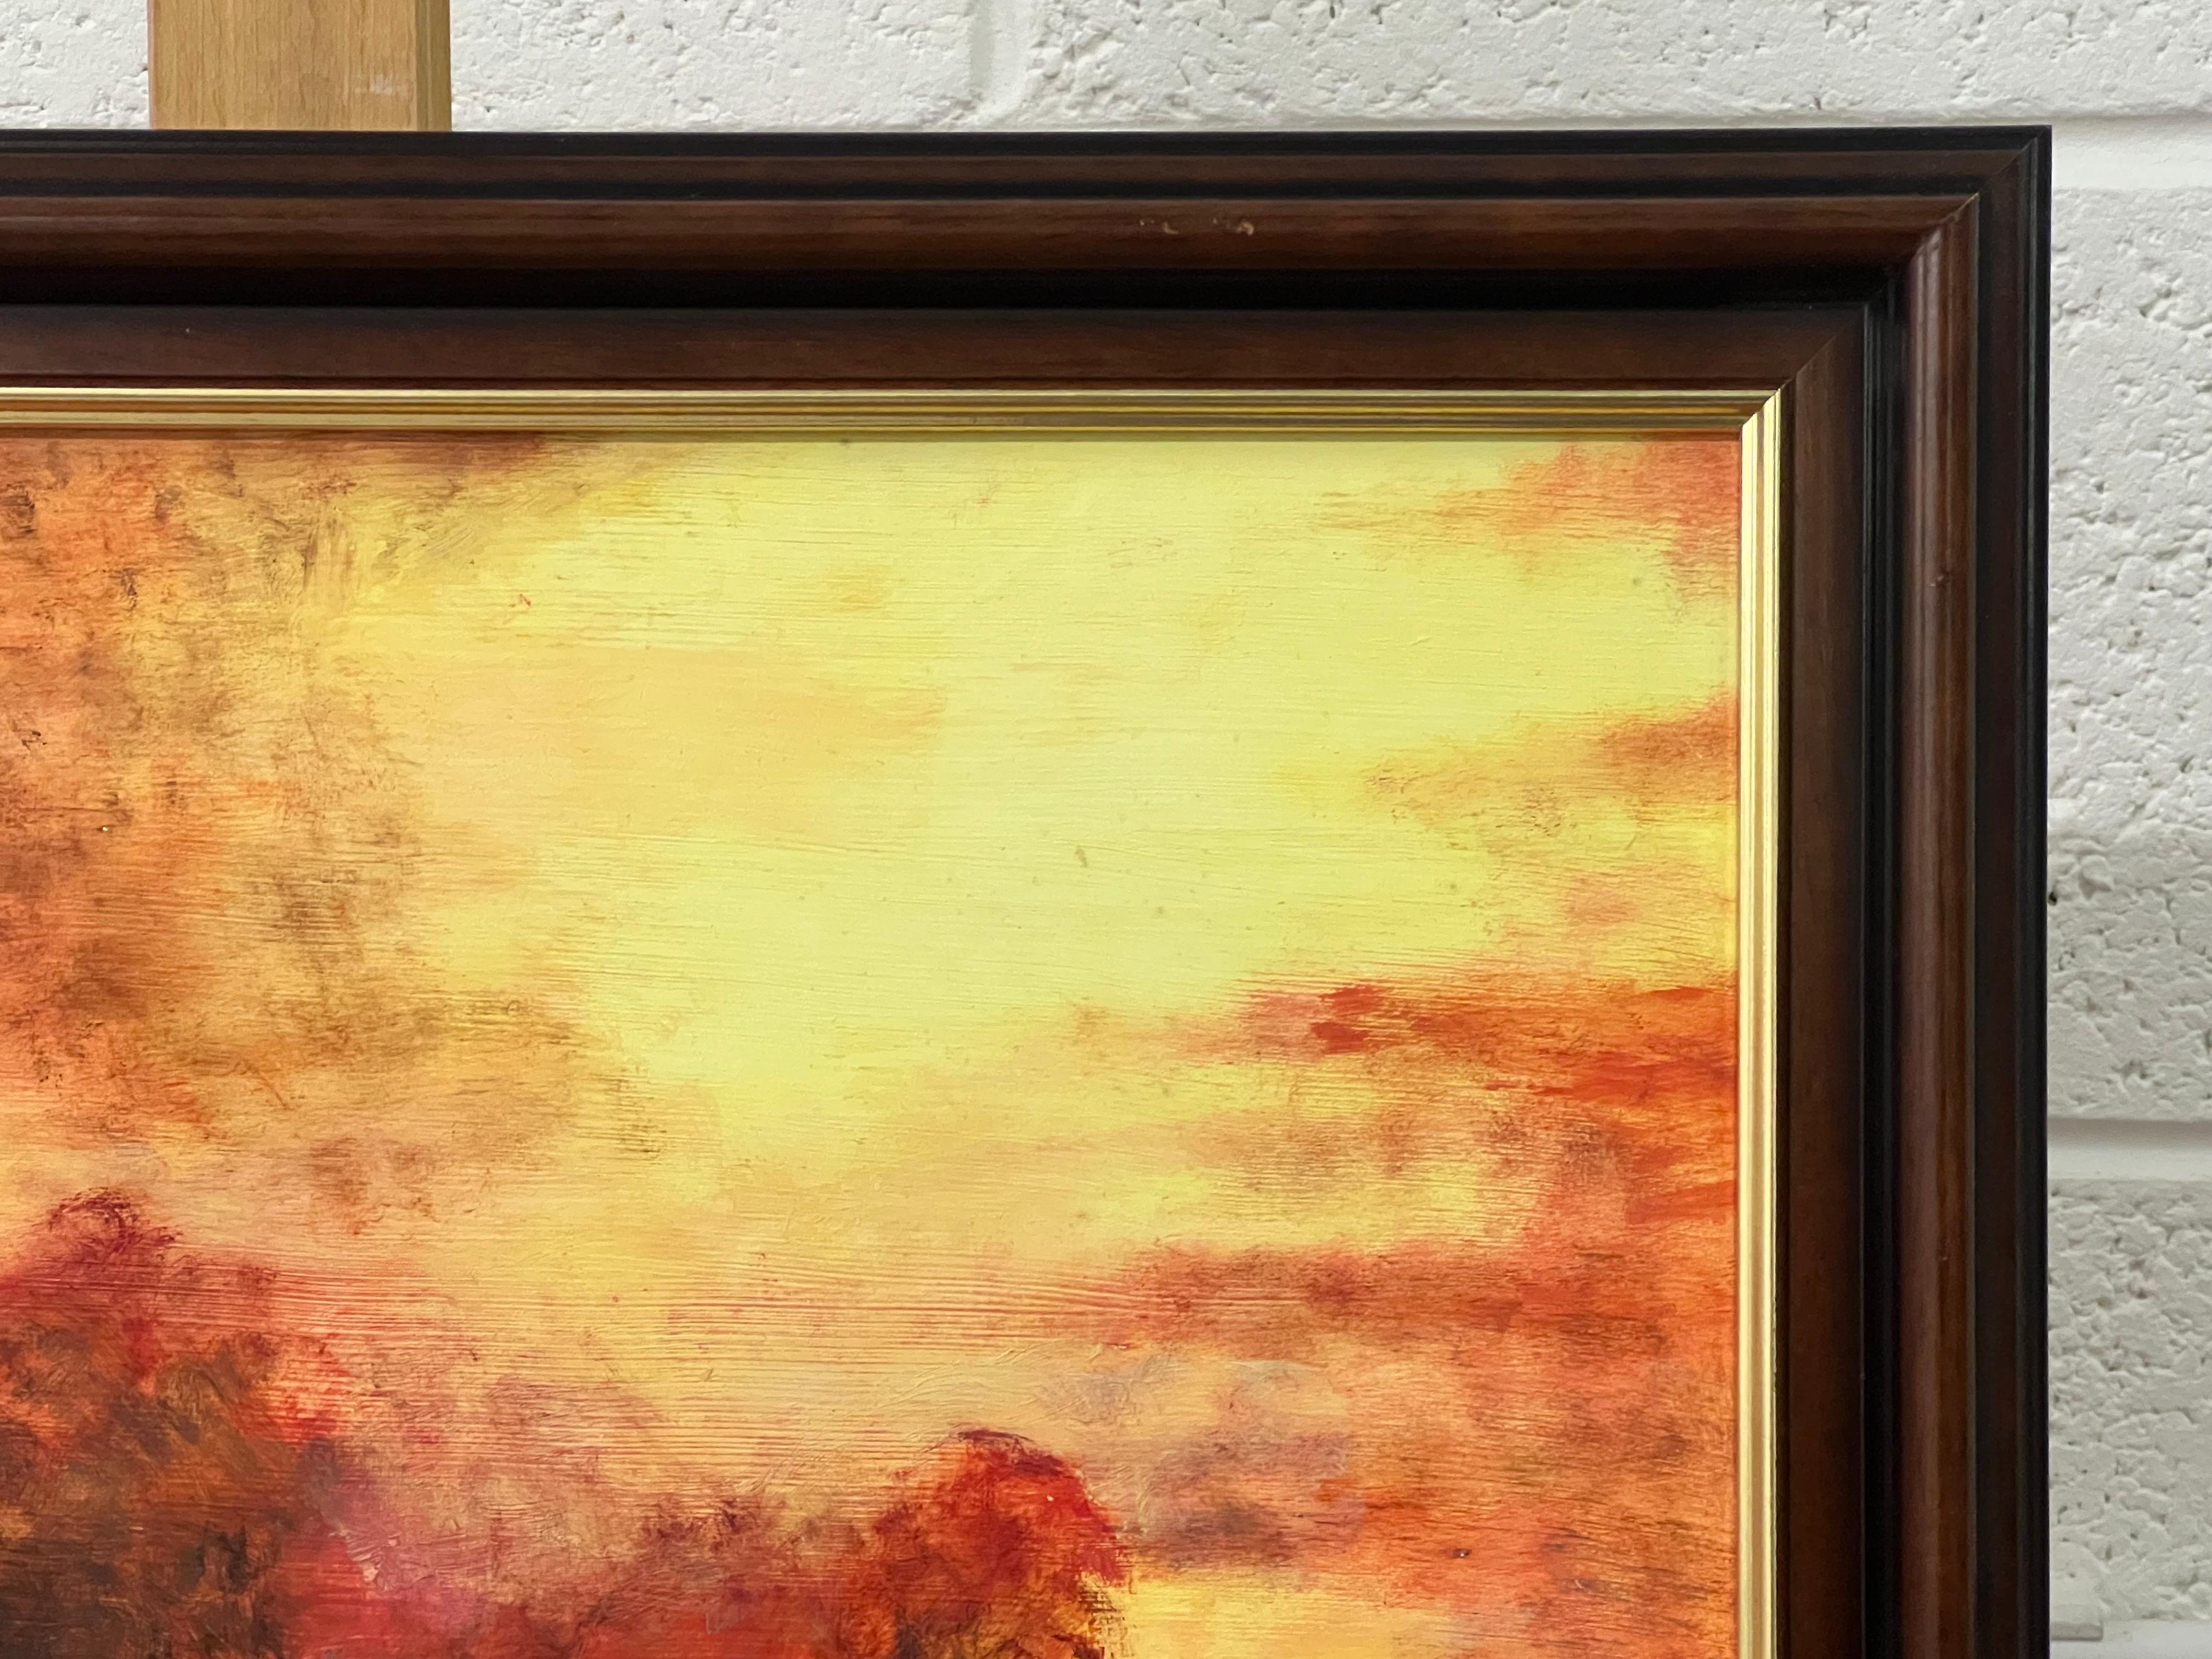 Tree Landscape Sunset with Oranges & Yellows by British Artist For Sale 6